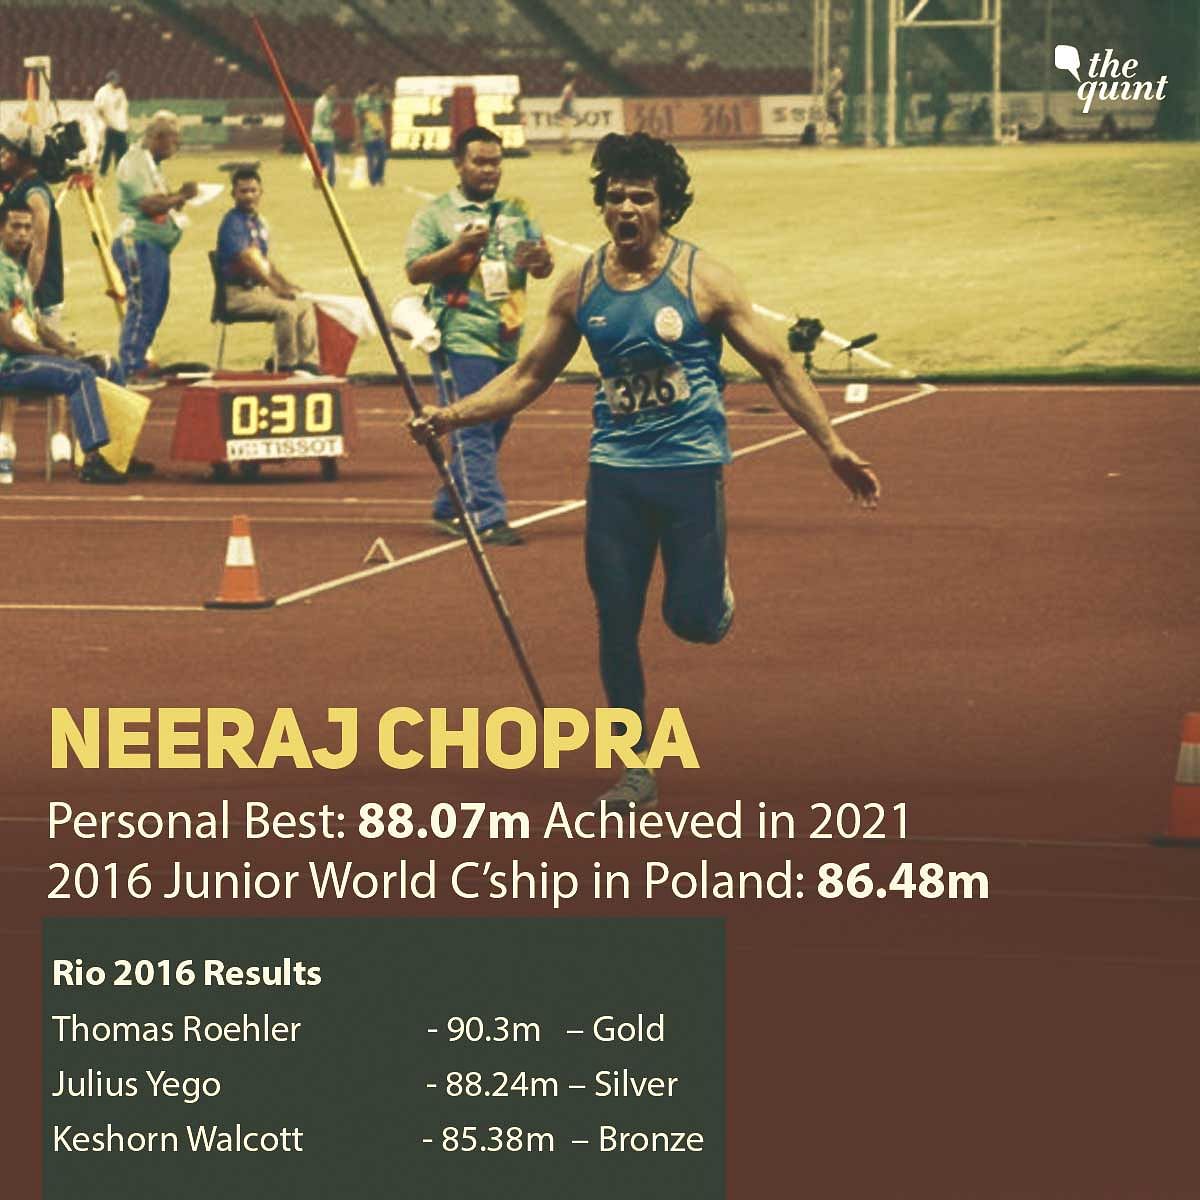 Javelin thrower Neeraj Chopra will be attending his first ever Olympic Games in Tokyo. 